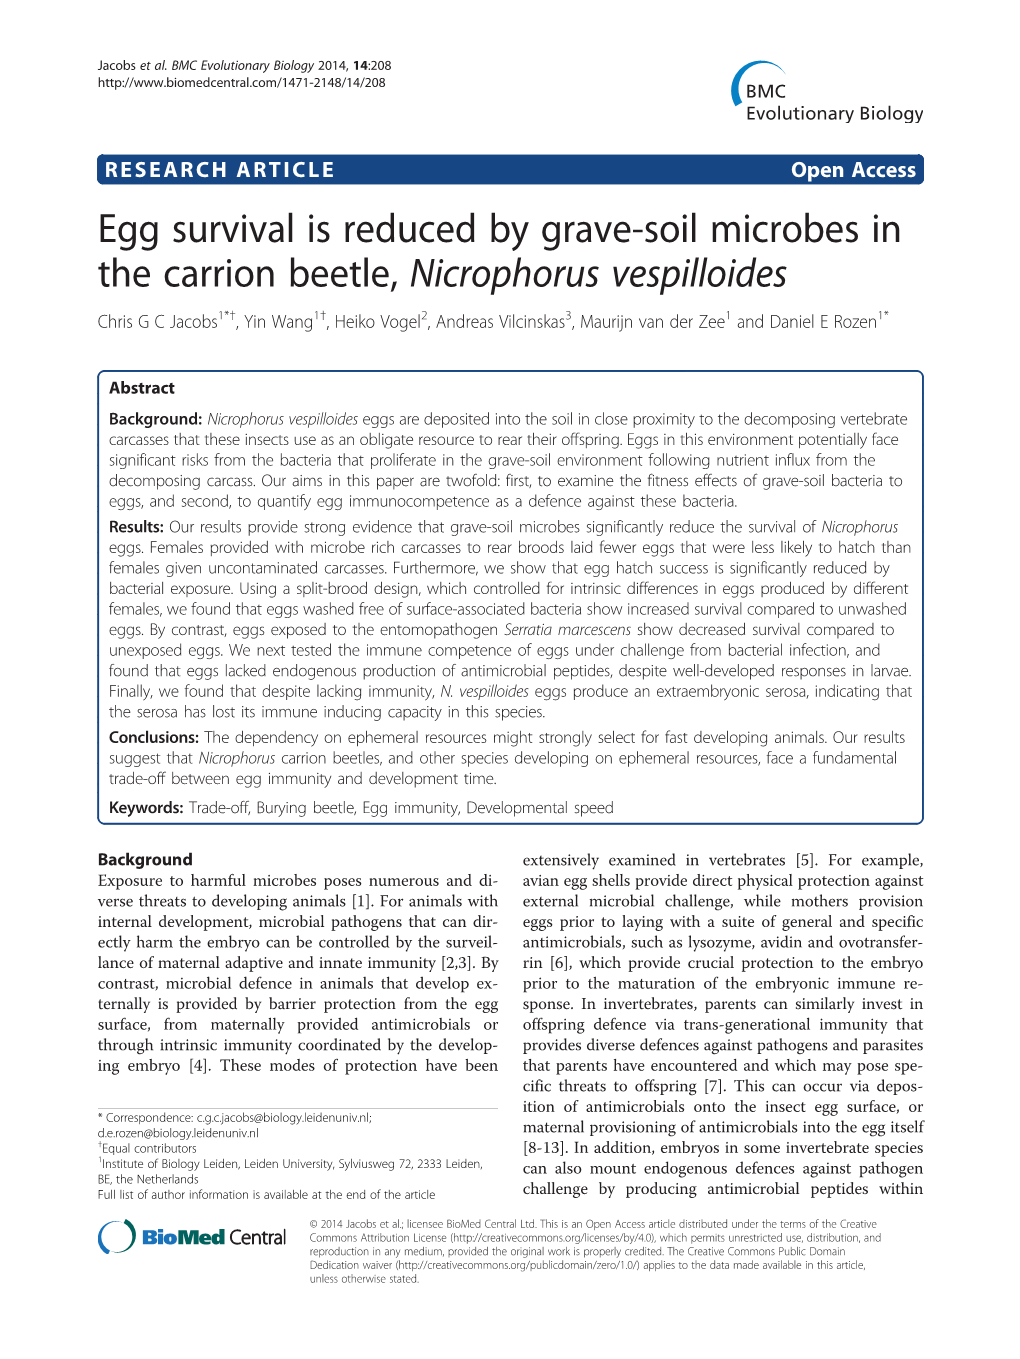 Egg Survival Is Reduced by Grave-Soil Microbes in the Carrion Beetle, Nicrophorus Vespilloides